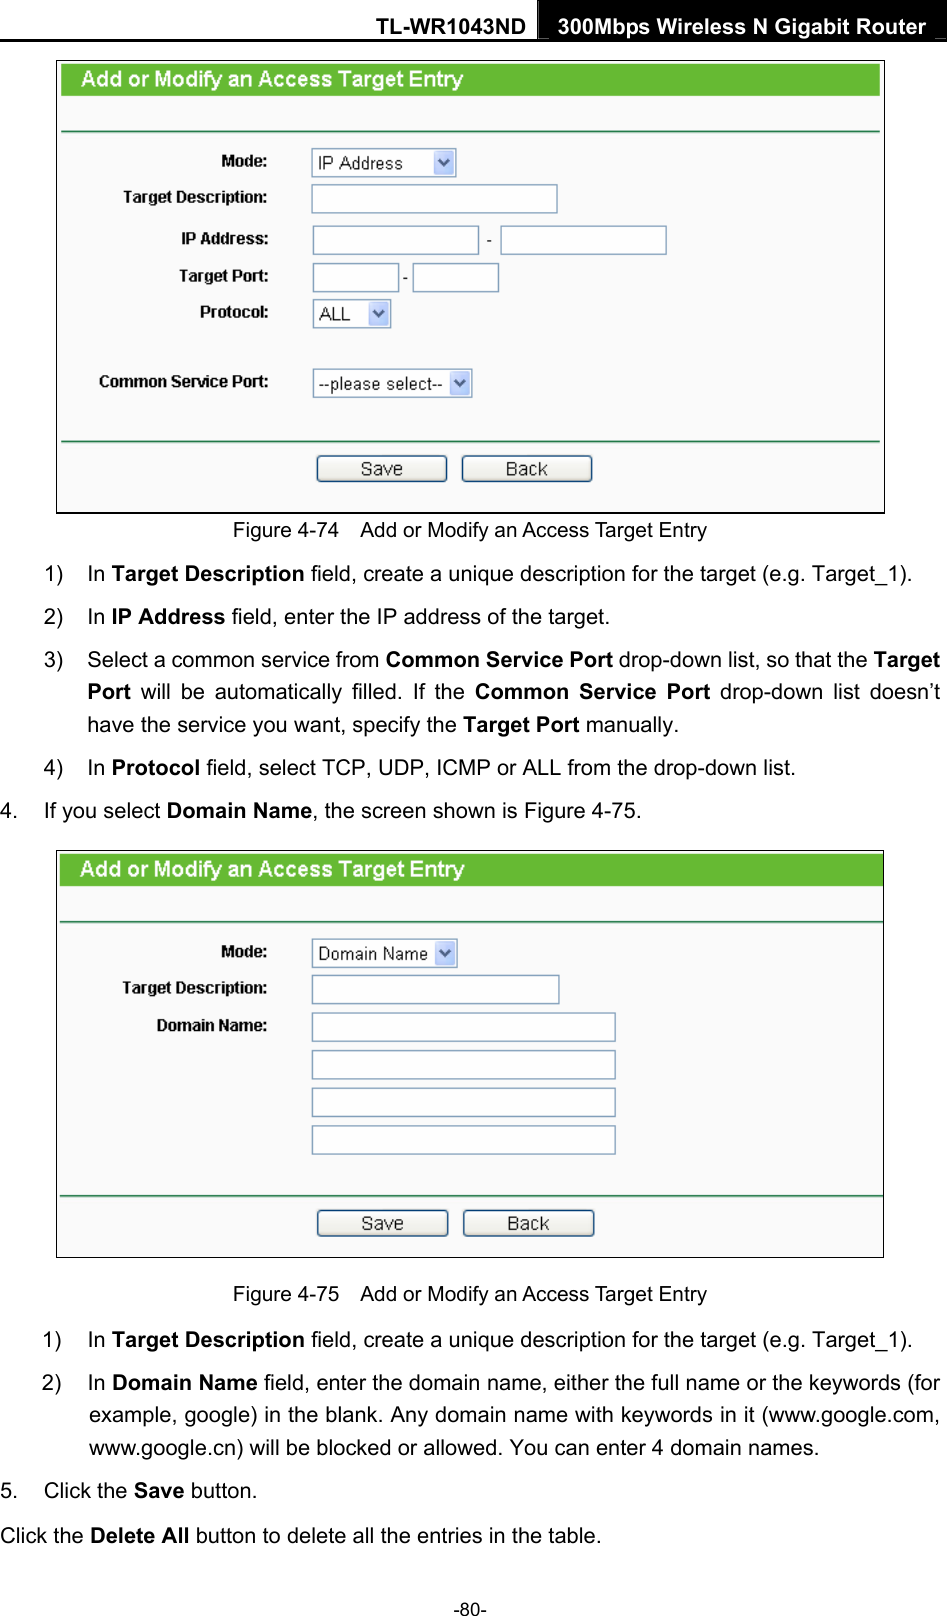 TL-WR1043ND 300Mbps Wireless N Gigabit Router   Figure 4-74    Add or Modify an Access Target Entry 1) In Target Description field, create a unique description for the target (e.g. Target_1). 2) In IP Address field, enter the IP address of the target. 3)  Select a common service from Common Service Port drop-down list, so that the Target Port will be automatically filled. If the Common Service Port drop-down list doesn’t have the service you want, specify the Target Port manually. 4) In Protocol field, select TCP, UDP, ICMP or ALL from the drop-down list.  4.  If you select Domain Name, the screen shown is Figure 4-75.  Figure 4-75    Add or Modify an Access Target Entry 1) In Target Description field, create a unique description for the target (e.g. Target_1). 2) In Domain Name field, enter the domain name, either the full name or the keywords (for example, google) in the blank. Any domain name with keywords in it (www.google.com, www.google.cn) will be blocked or allowed. You can enter 4 domain names. 5. Click the Save button. Click the Delete All button to delete all the entries in the table. -80- 